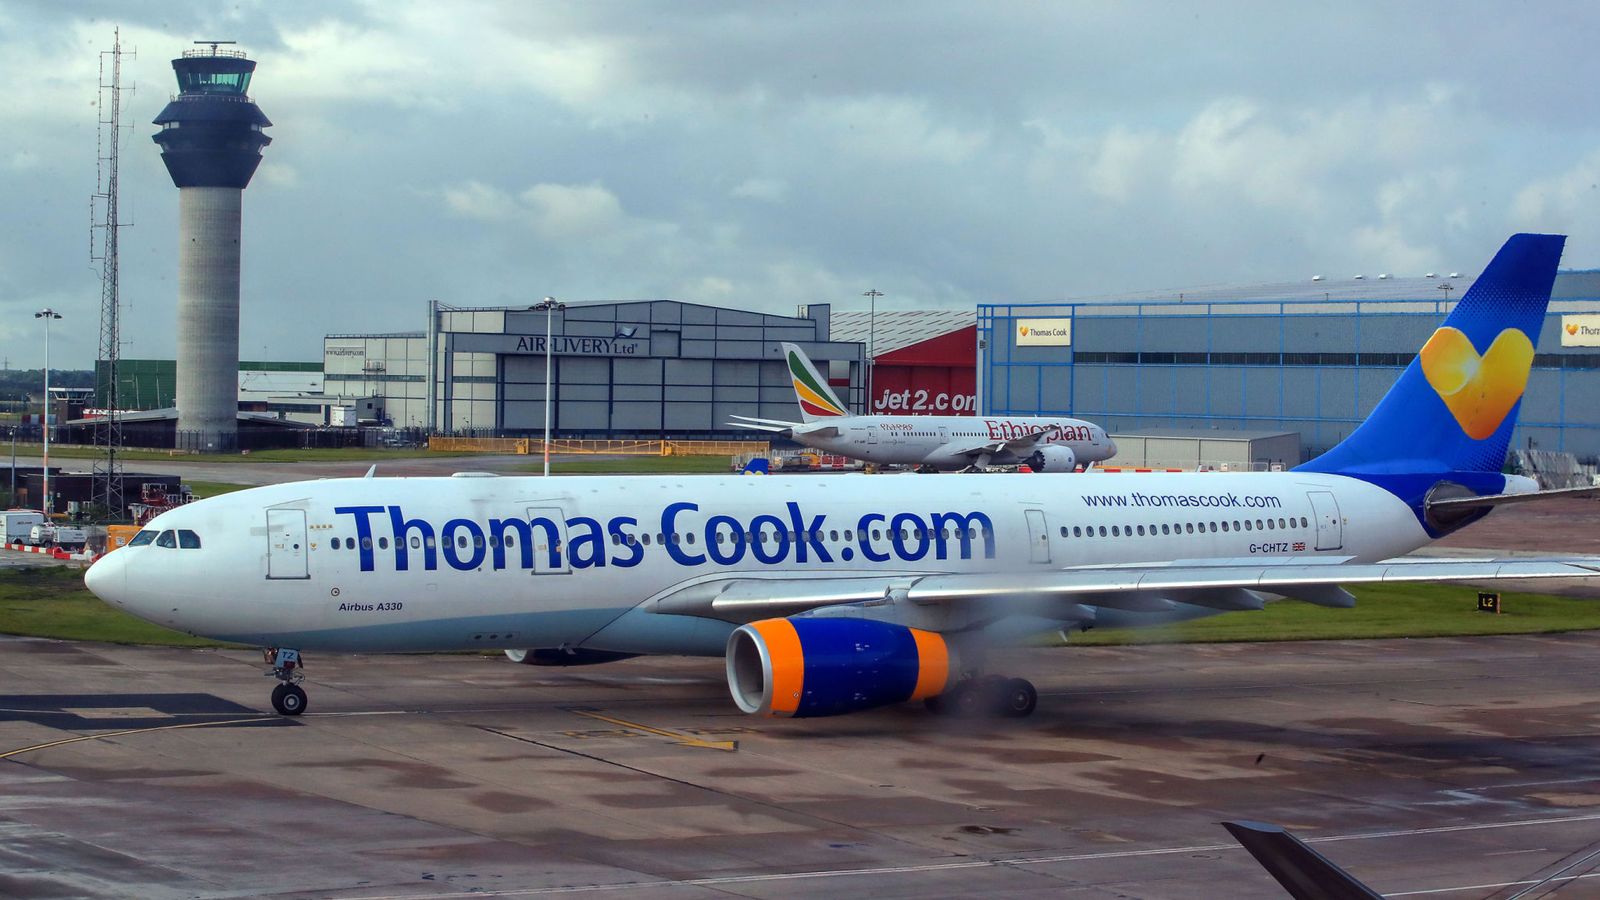 UPDATE 1-"Absolutely gutted" - demise of Thomas Cook wrecks travellers' plans